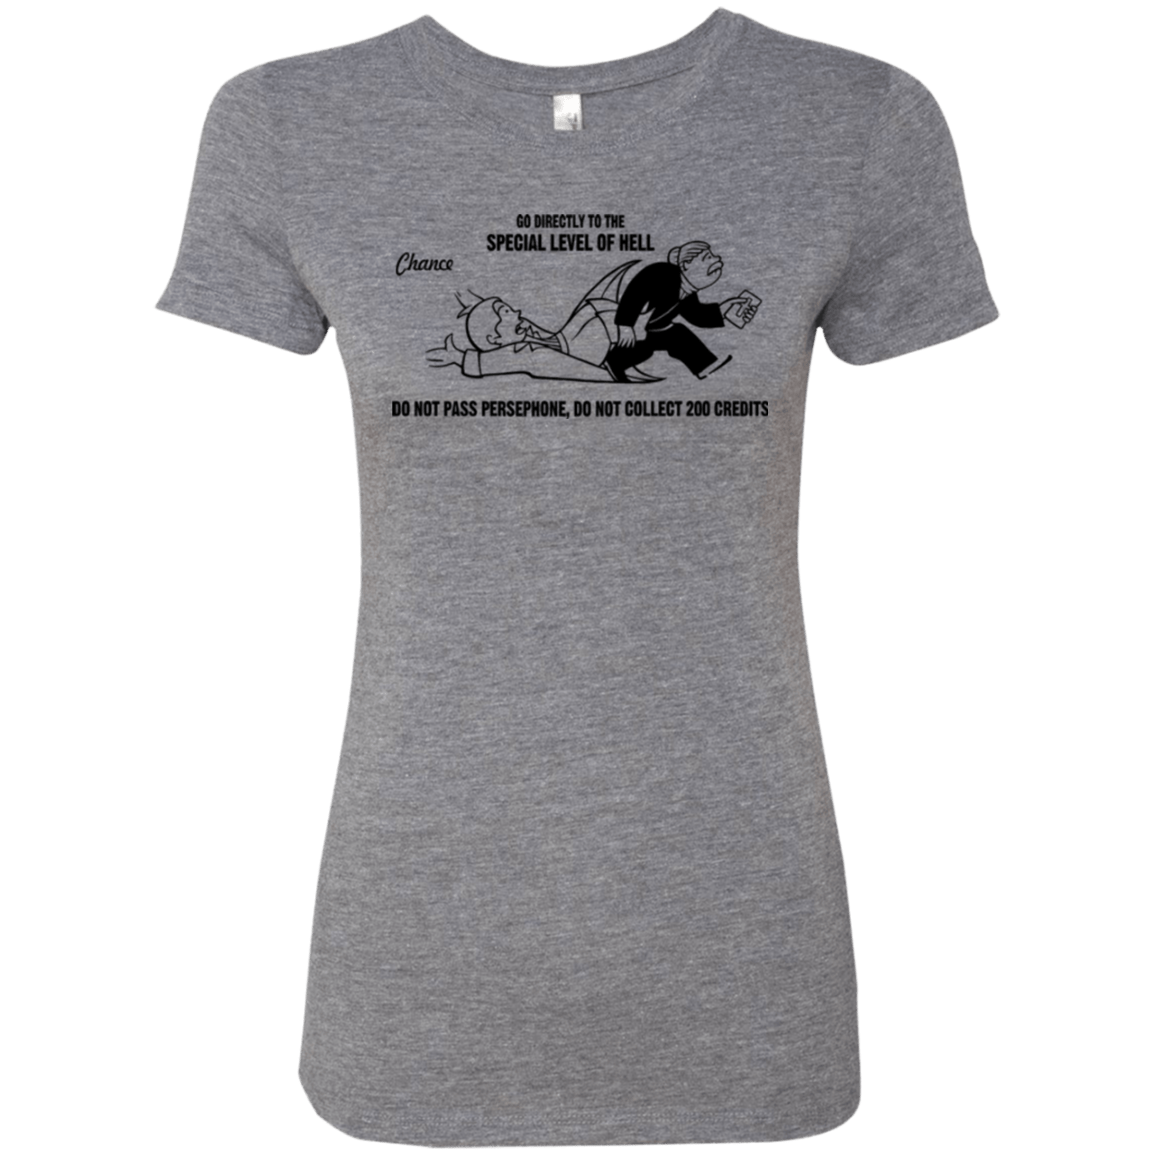 T-Shirts Premium Heather / Small Special Level of Hell Women's Triblend T-Shirt